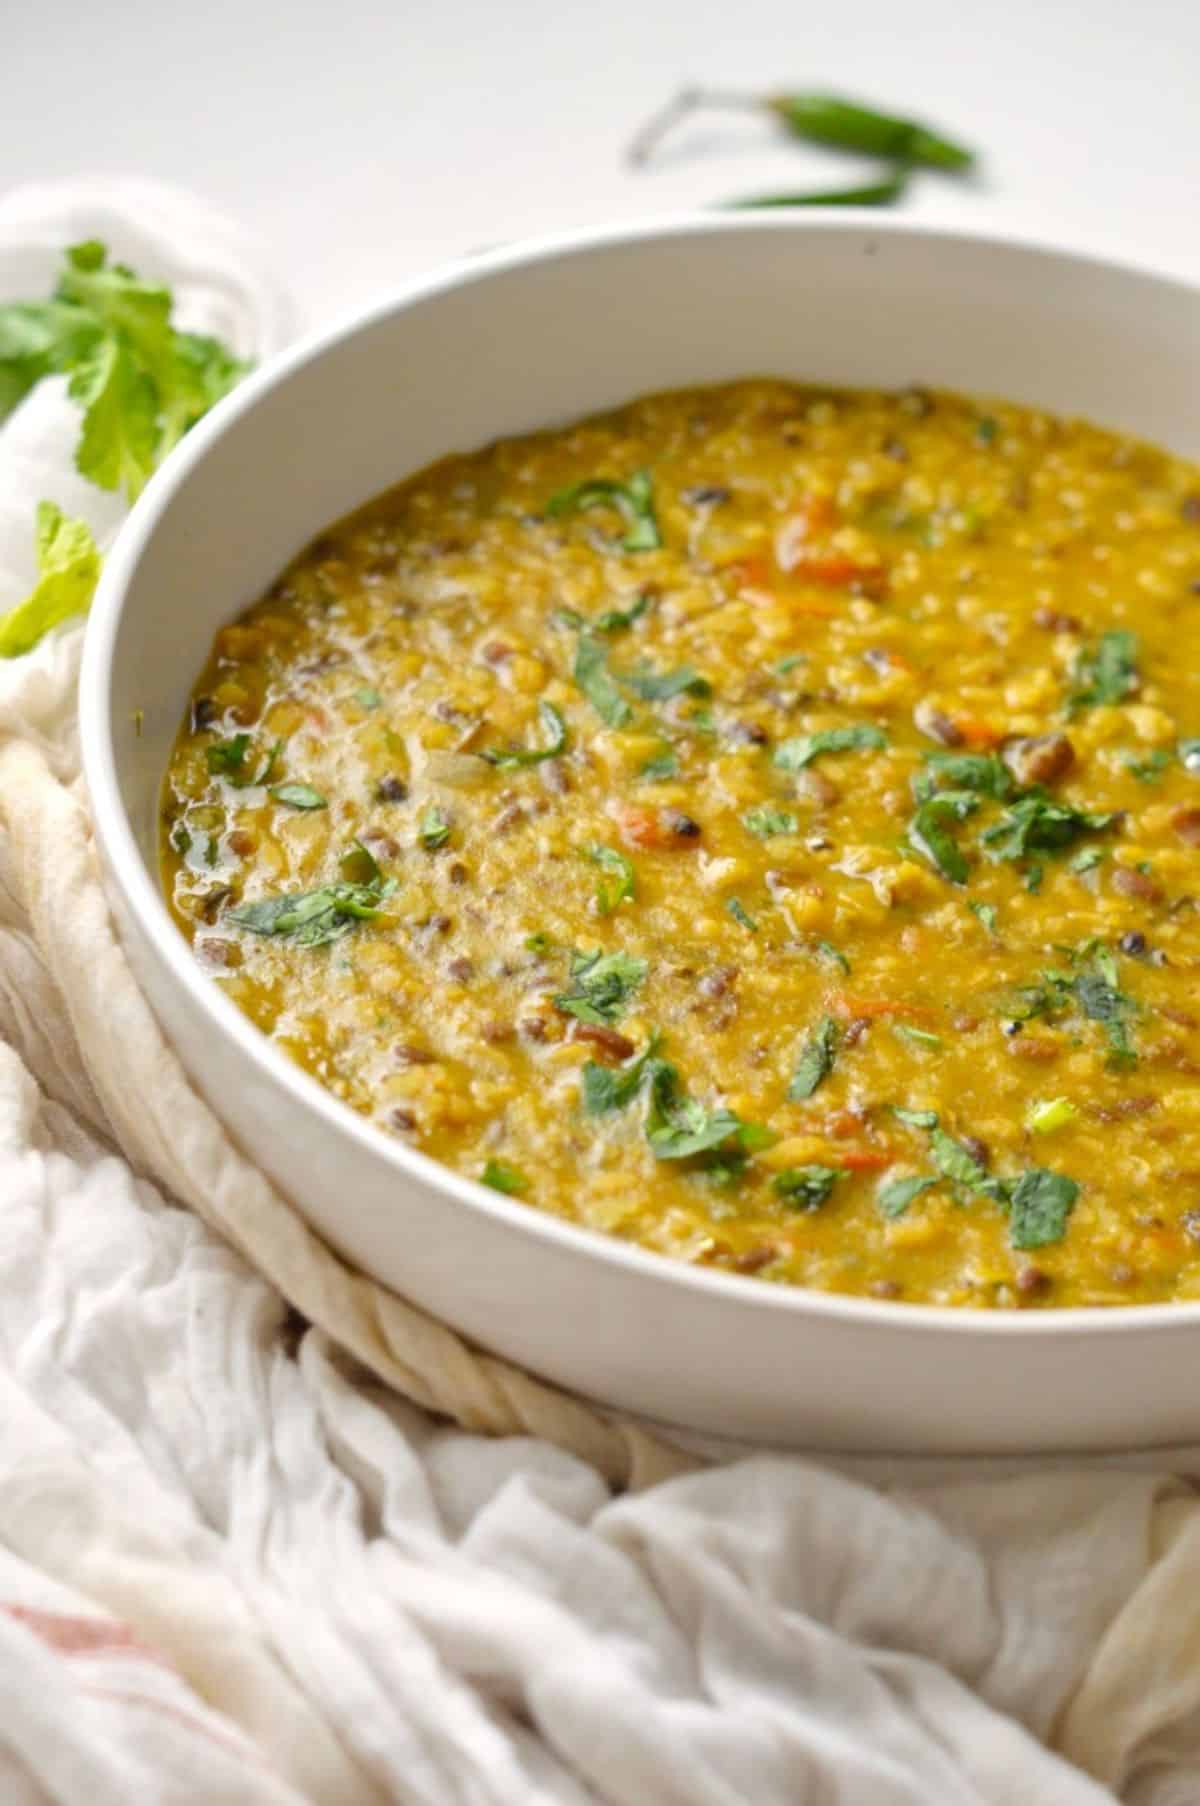 Spicy Indian Urad Dal in a white bowl.